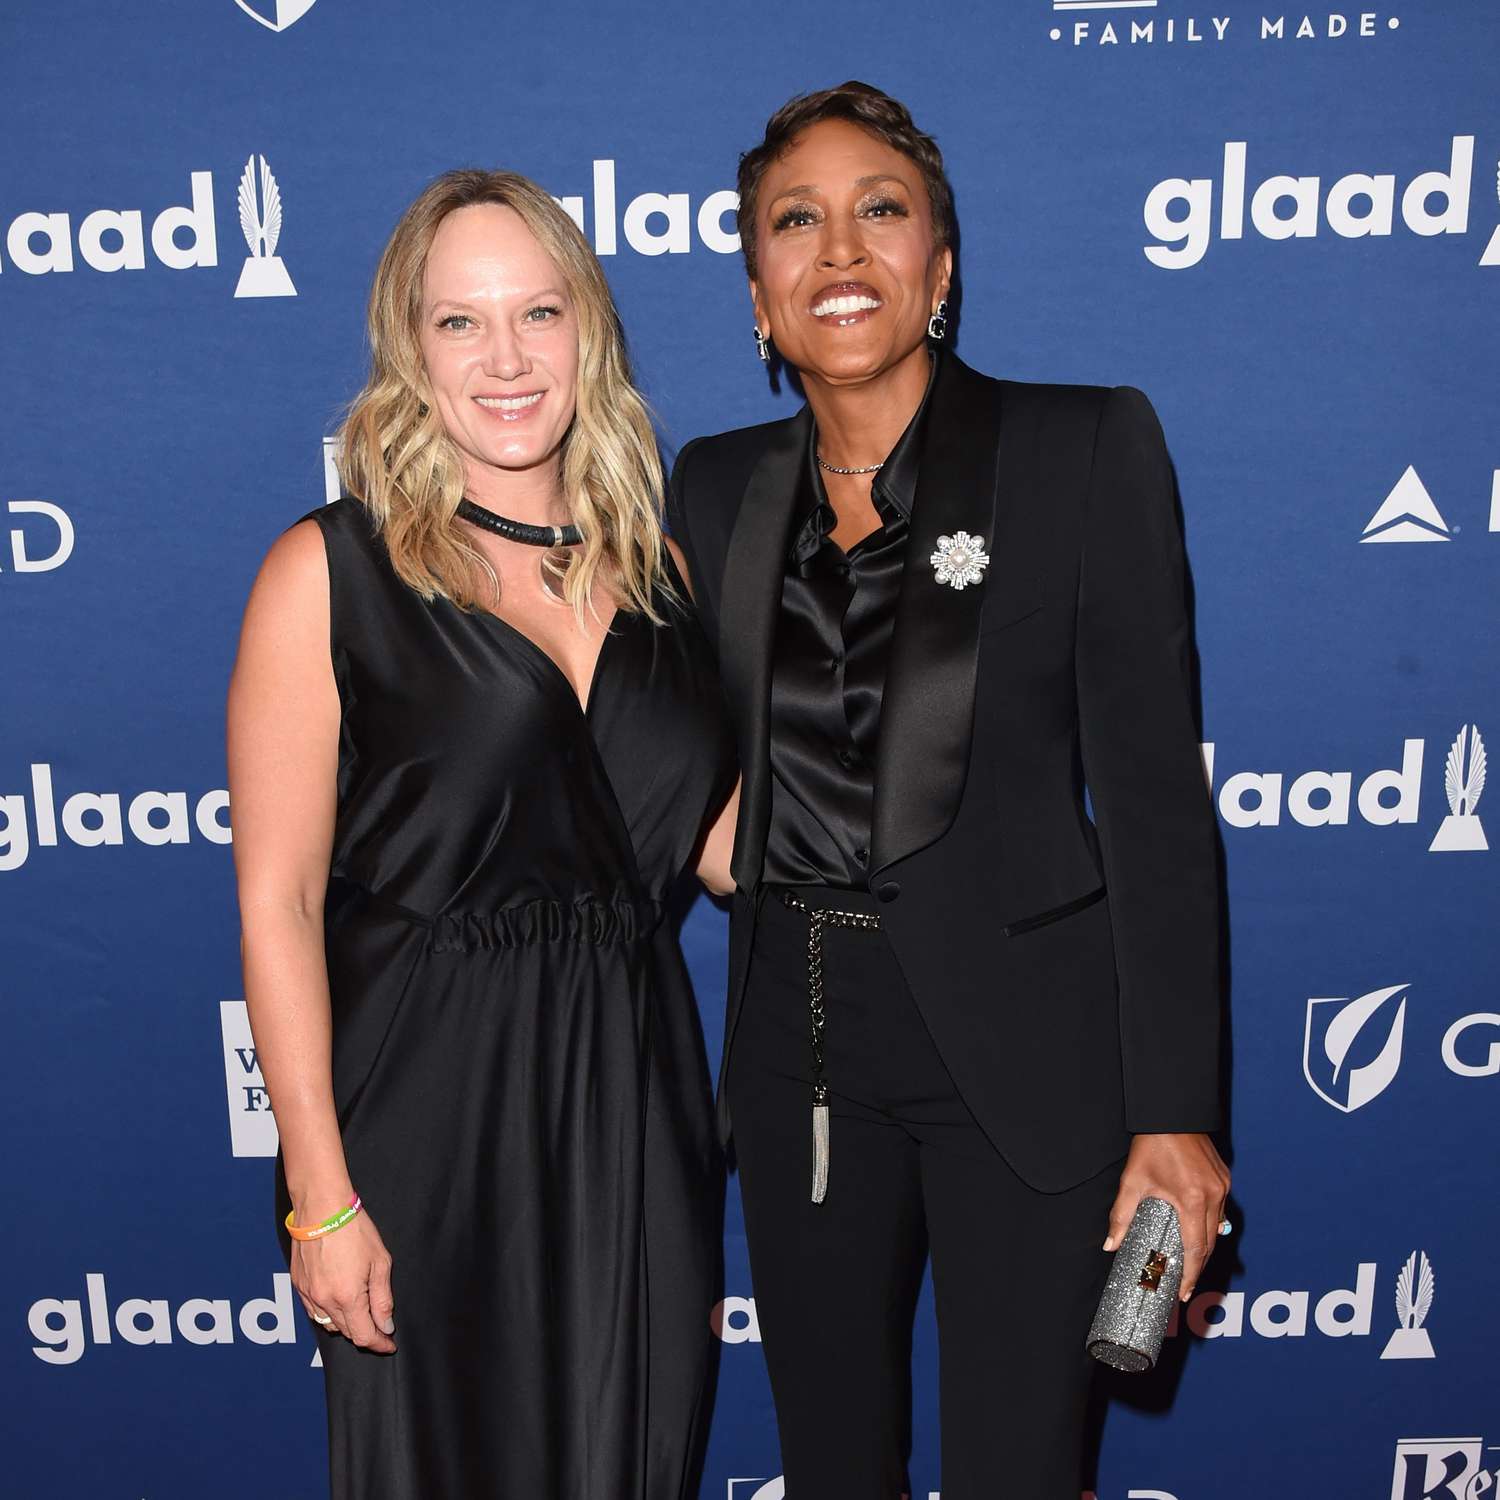 Robin Roberts Biography: Wife, Age, Husband, Net Worth, Salary, Height, Leaving GMA, Family, Partner